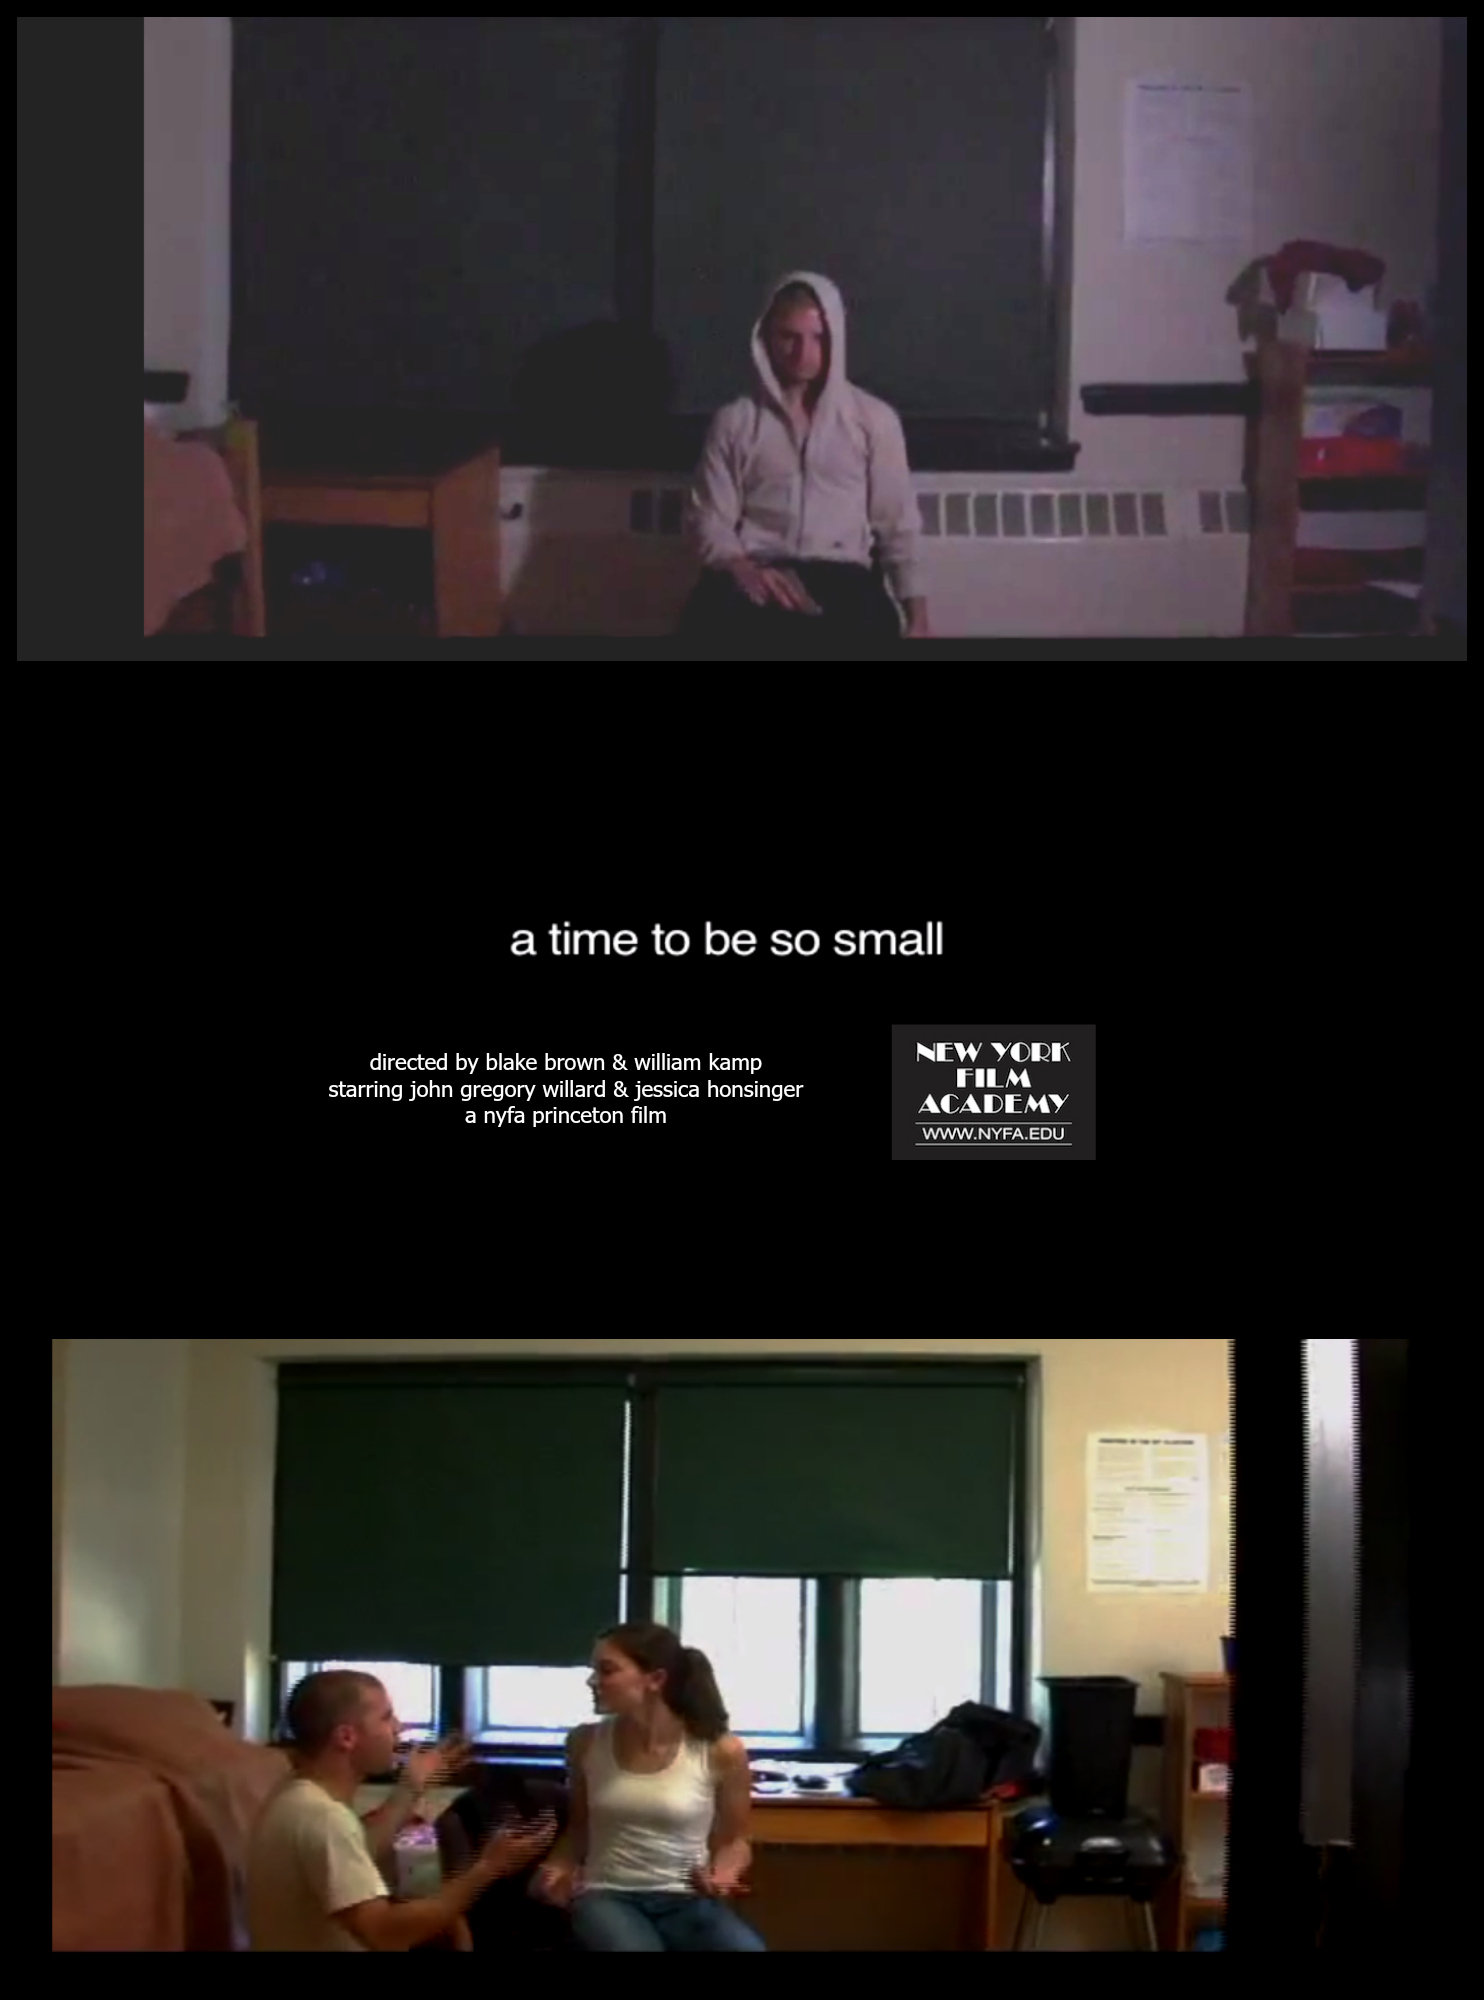 A Time to Be So Small, a NYFA Princeton film by Blake Brown and William Kamp.